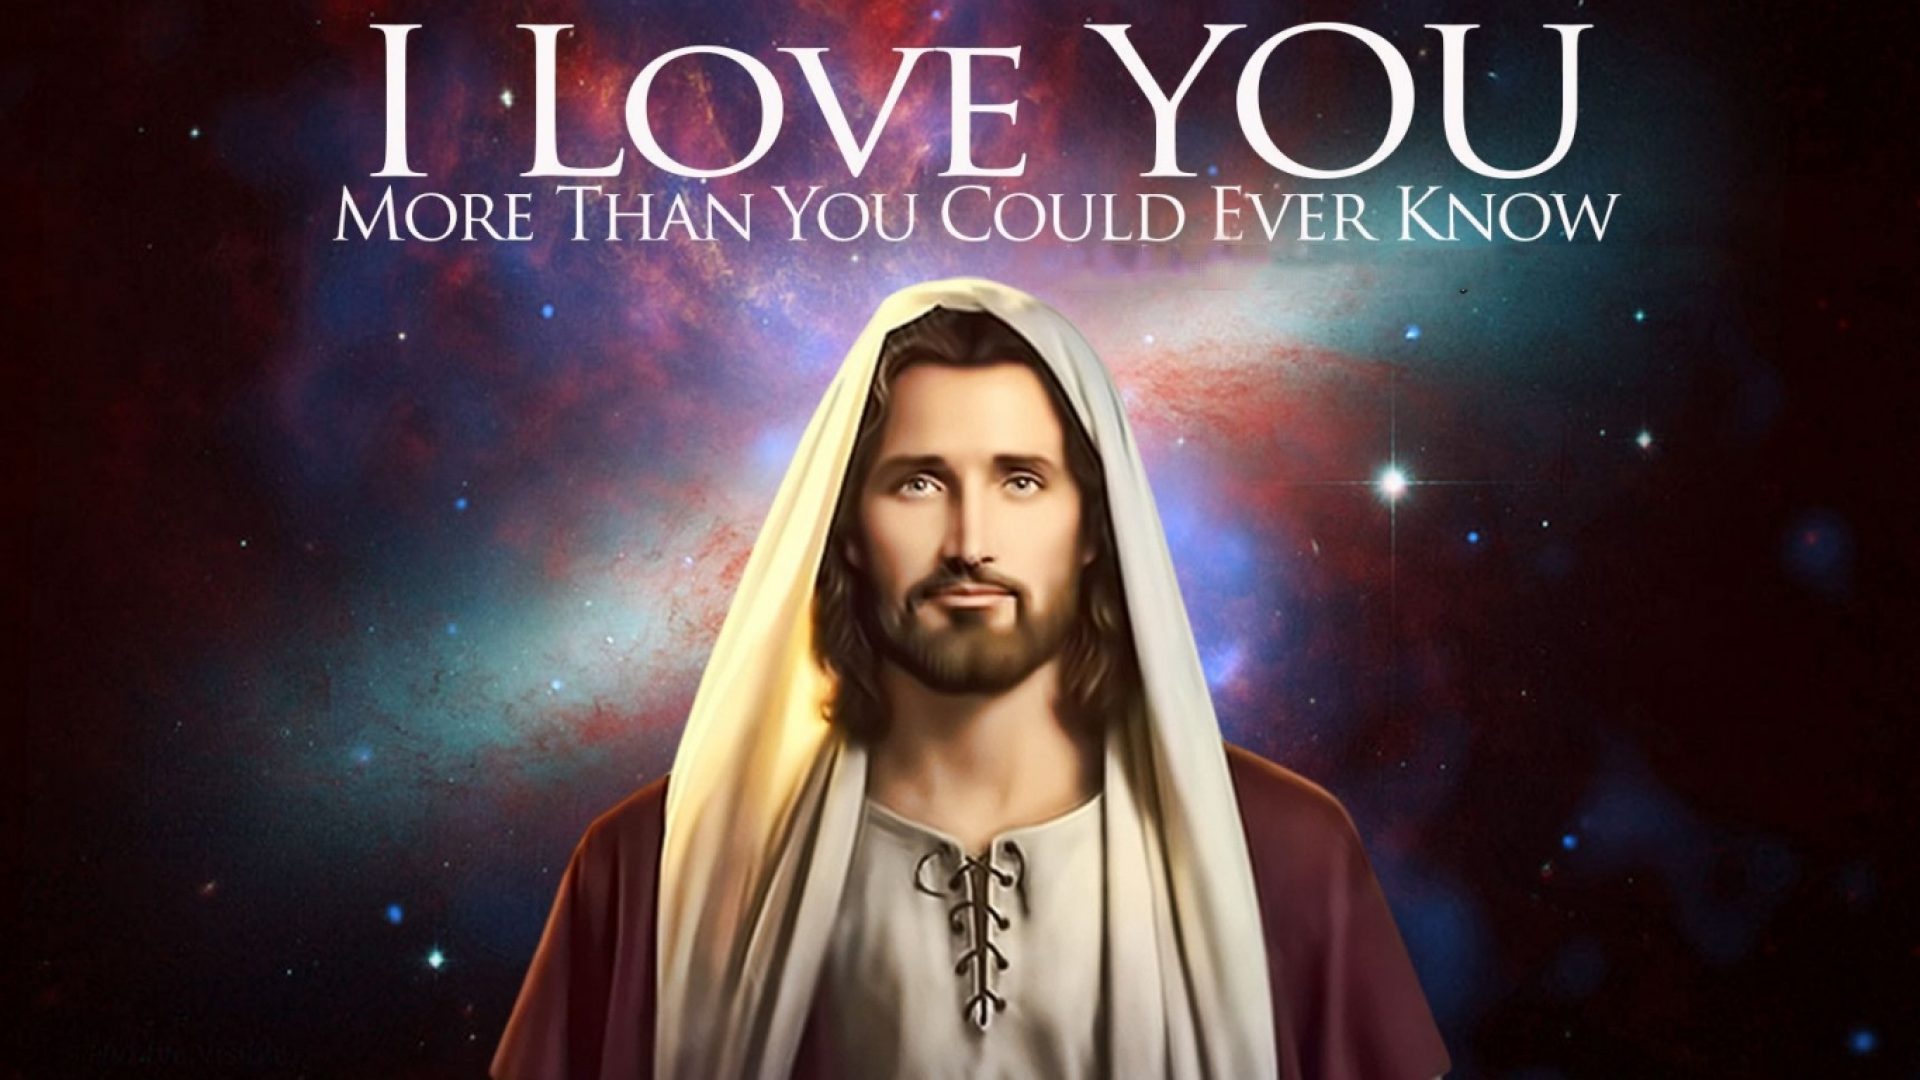 Jesus Loves You Quotes Image | Christian Wallpapers